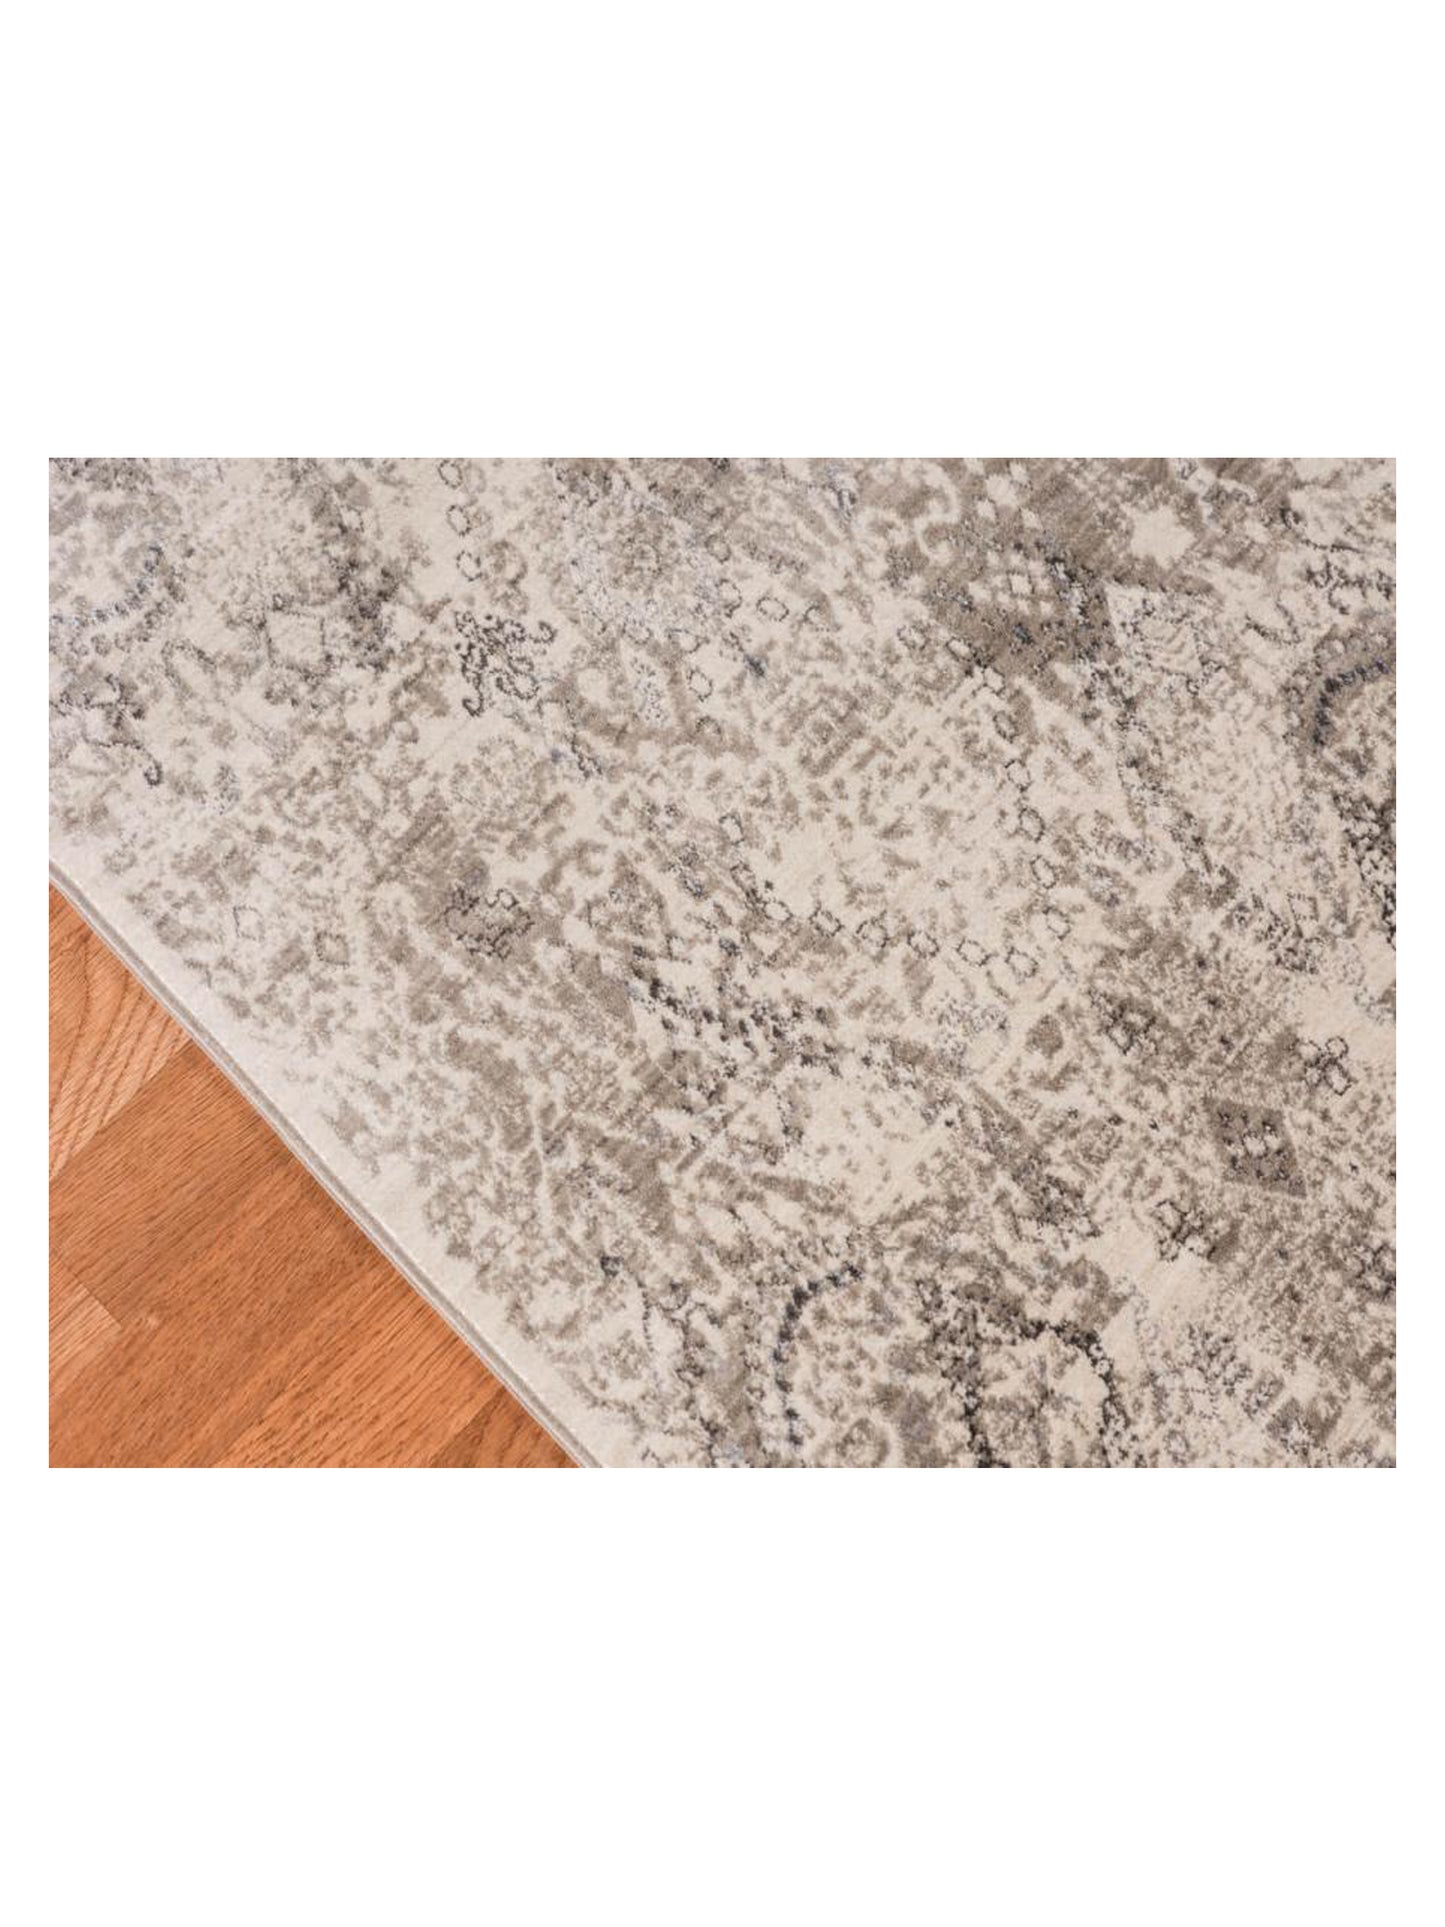 Limited Rosy RO-507 Beige  Transitional Machinemade Rug